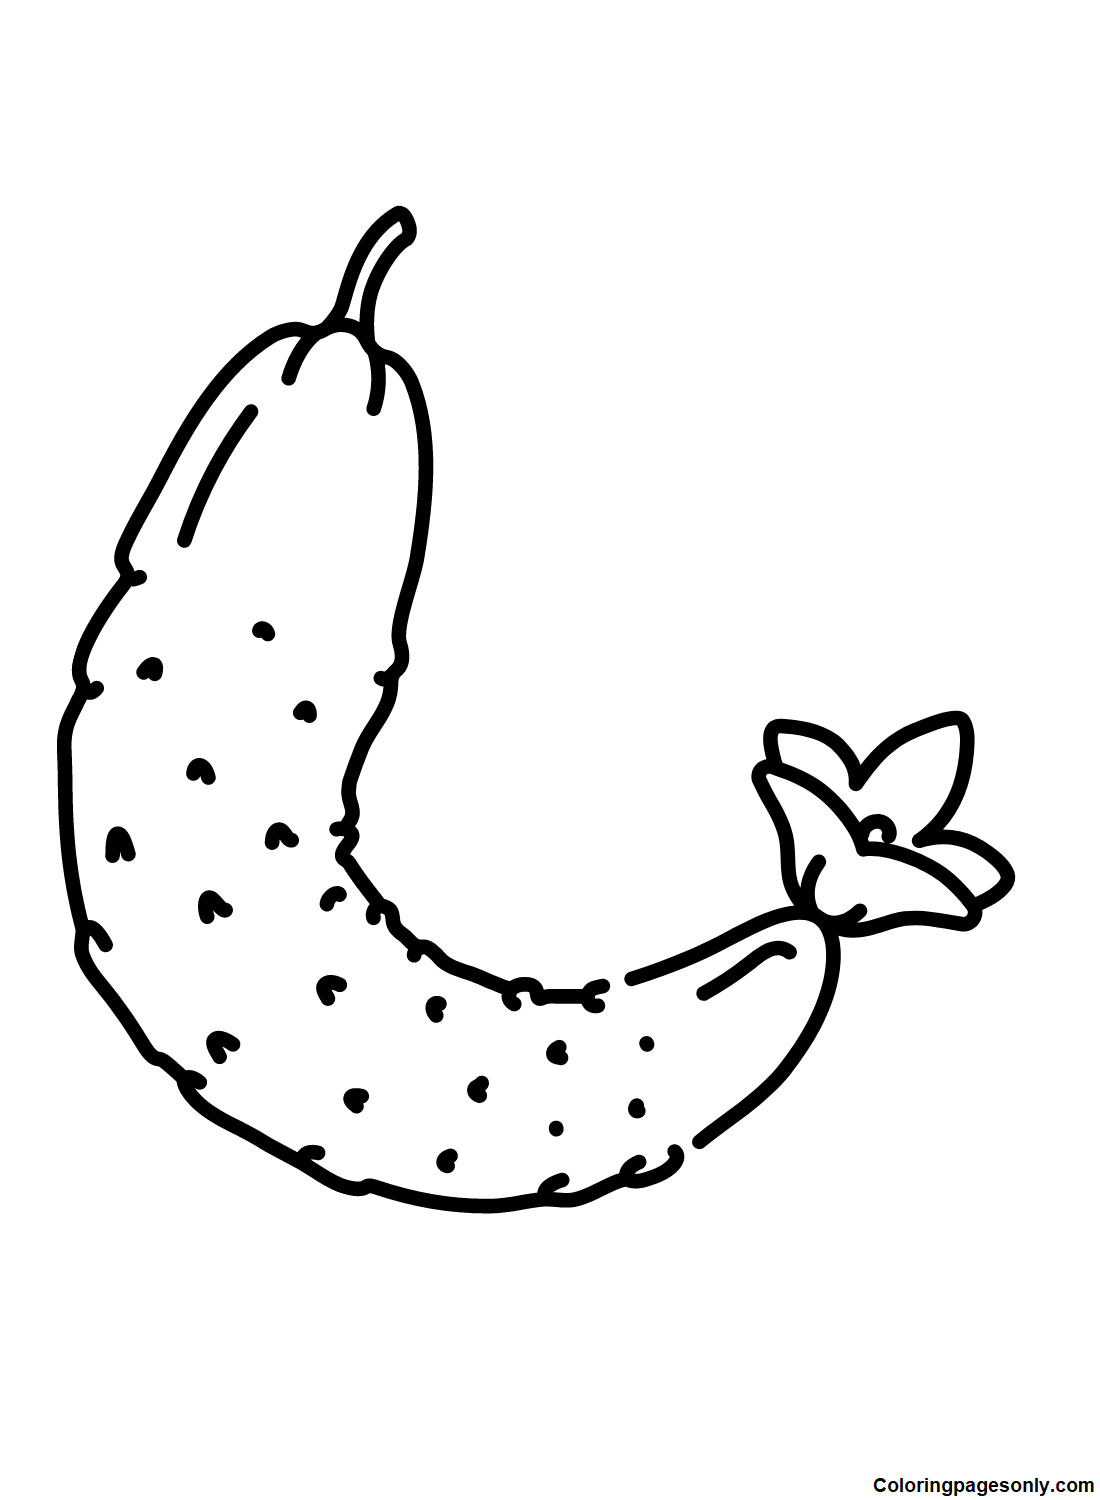 Cucumber Images Coloring Pages